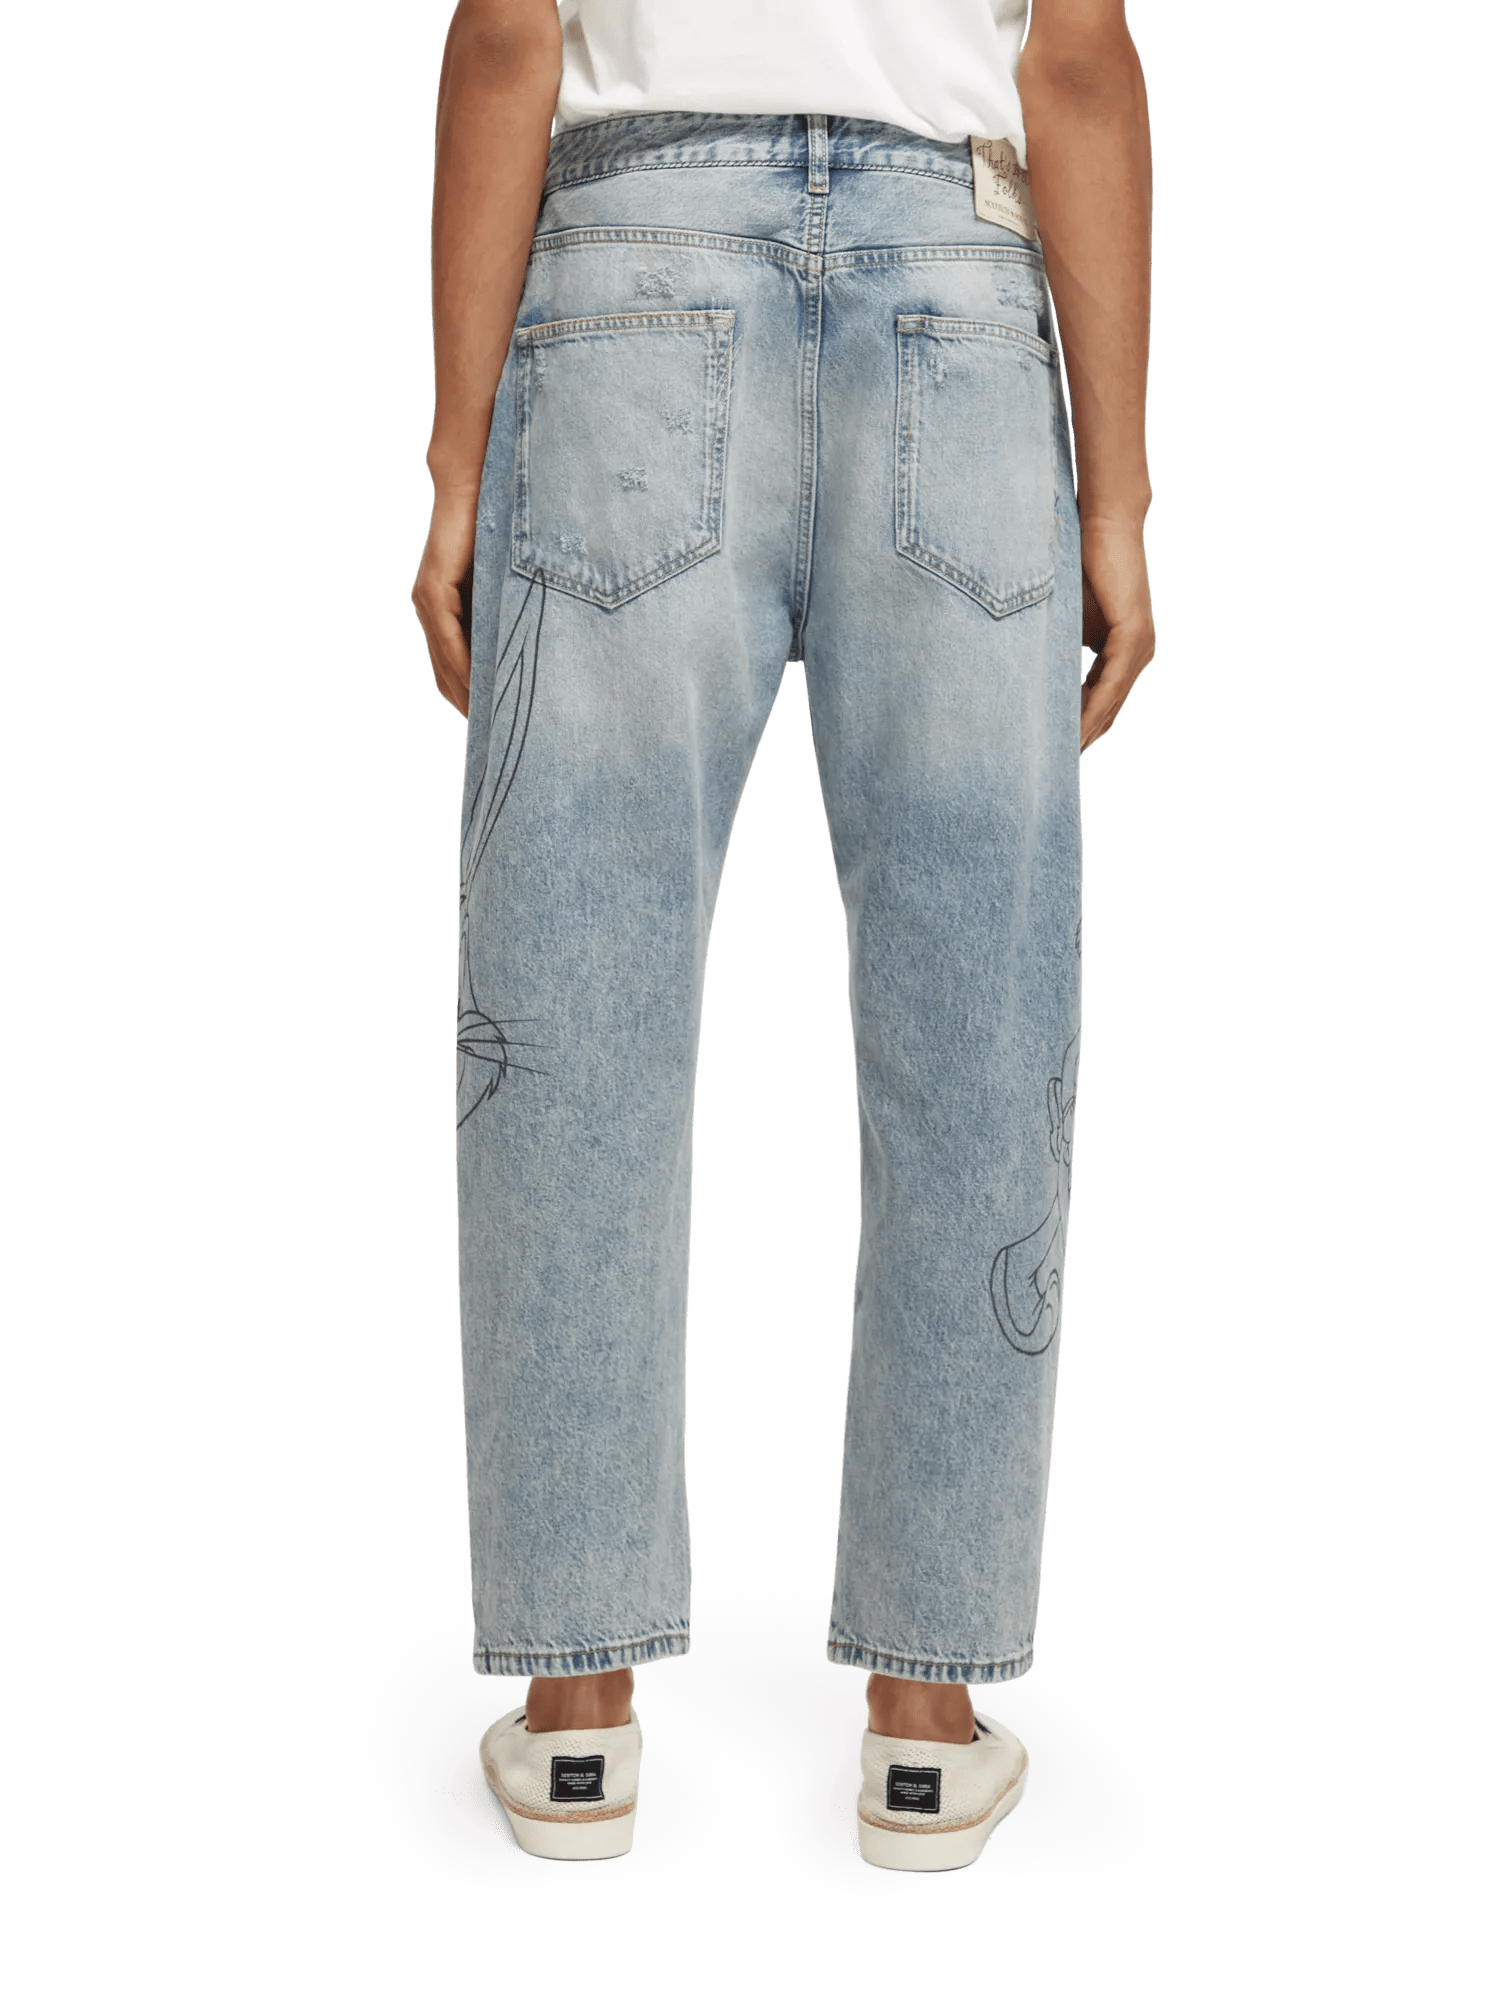 Scotch & Soda Bugs Bunny- The Spirit unisex relaxed jean -That's All Folks NHD-BCK